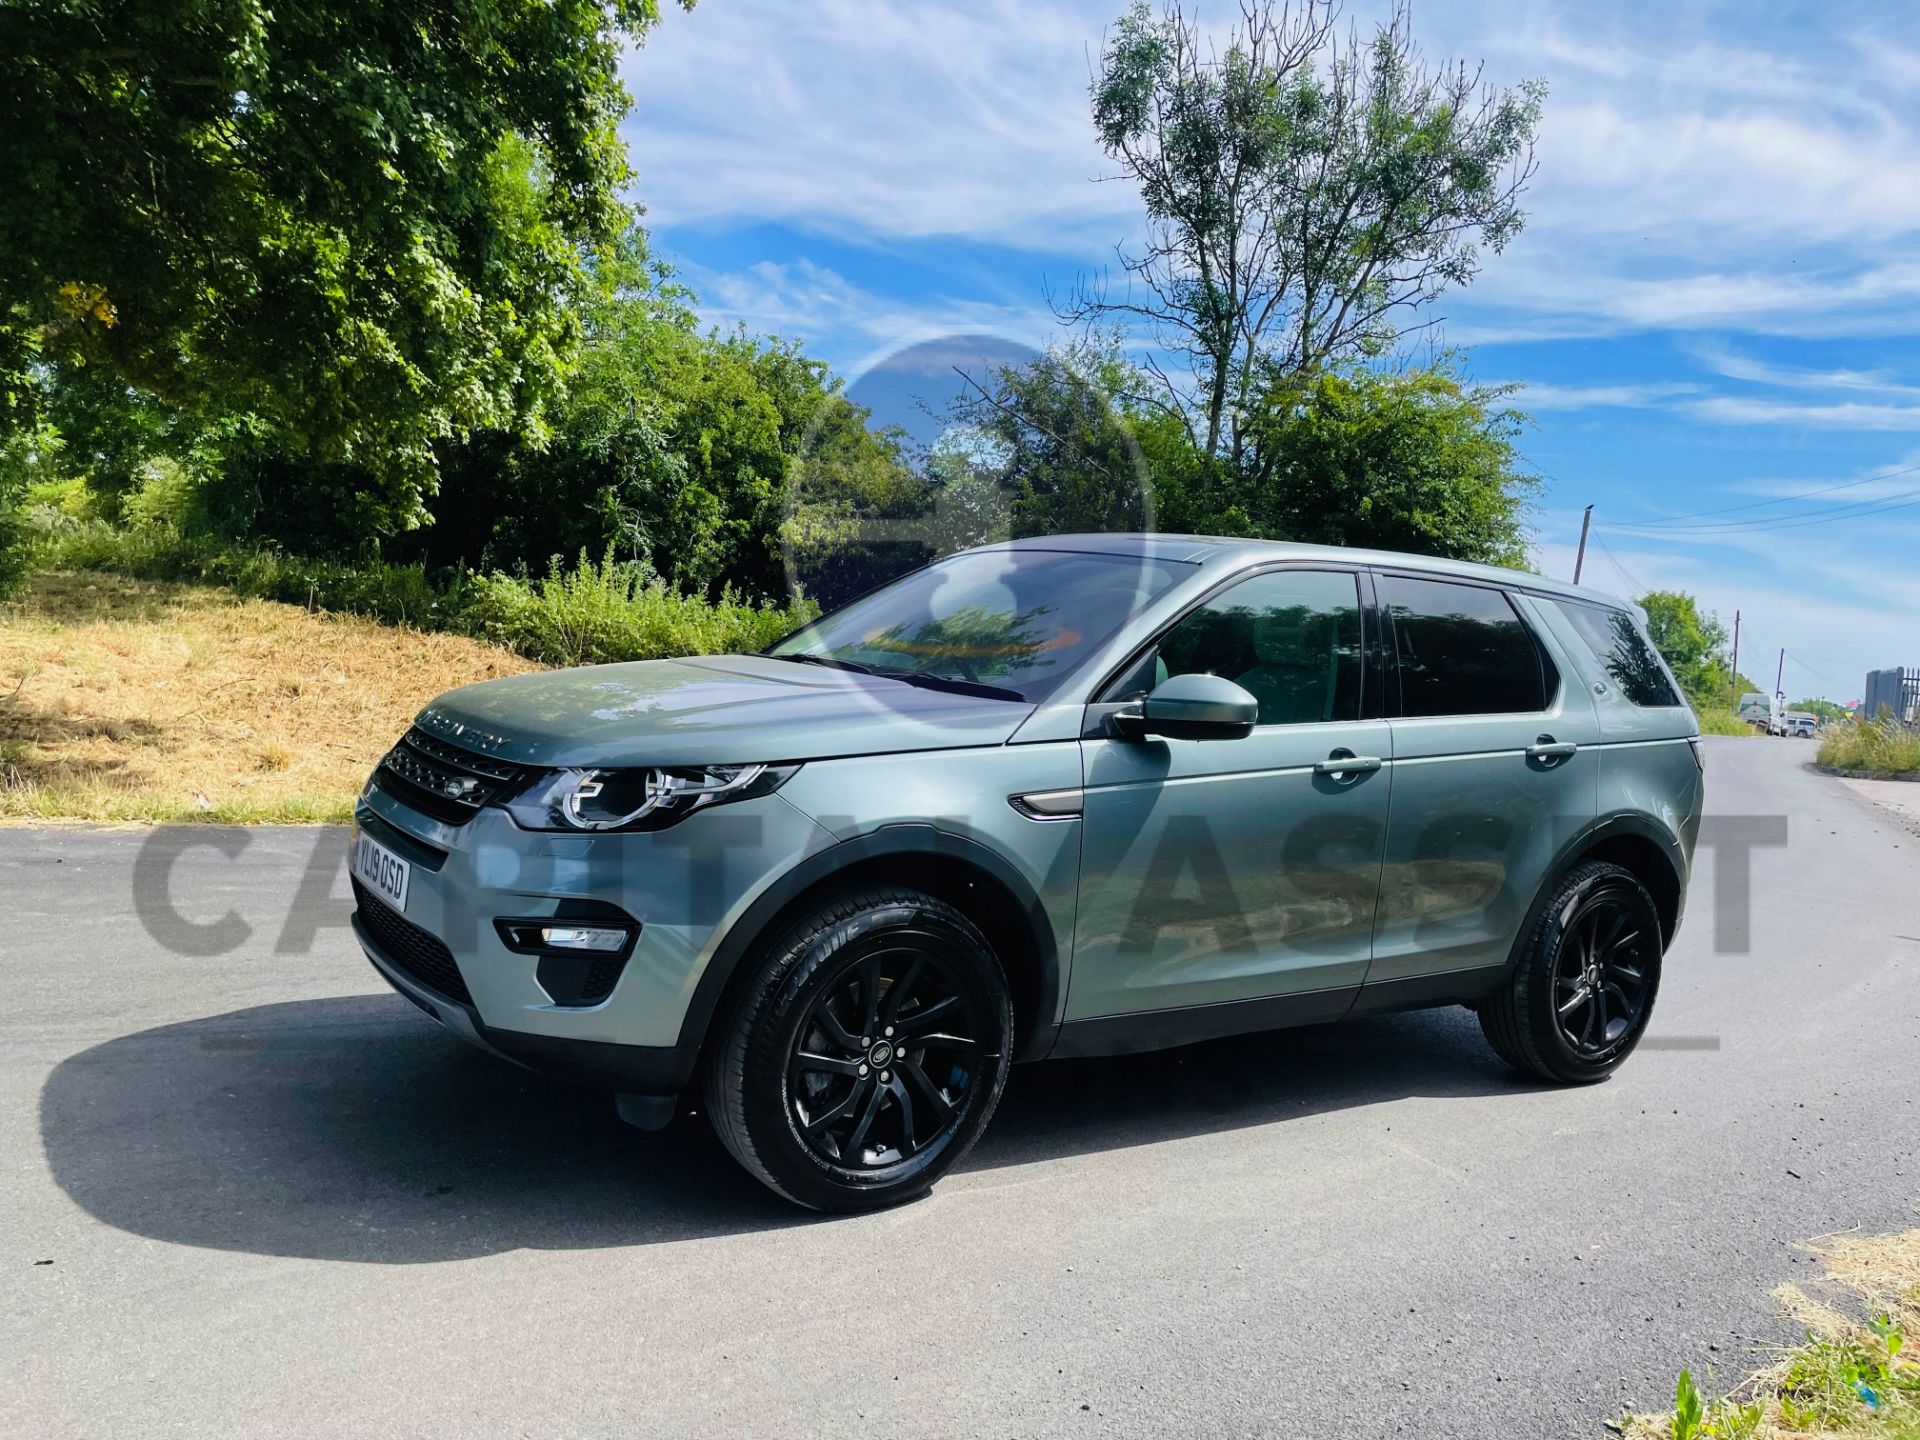 (On Sale) LAND ROVER DISCOVERY SPORT *SE TECH* SUV (2019 - EURO 6) 2.0 ED4 - STOP/START *HUGE SPEC* - Image 7 of 55